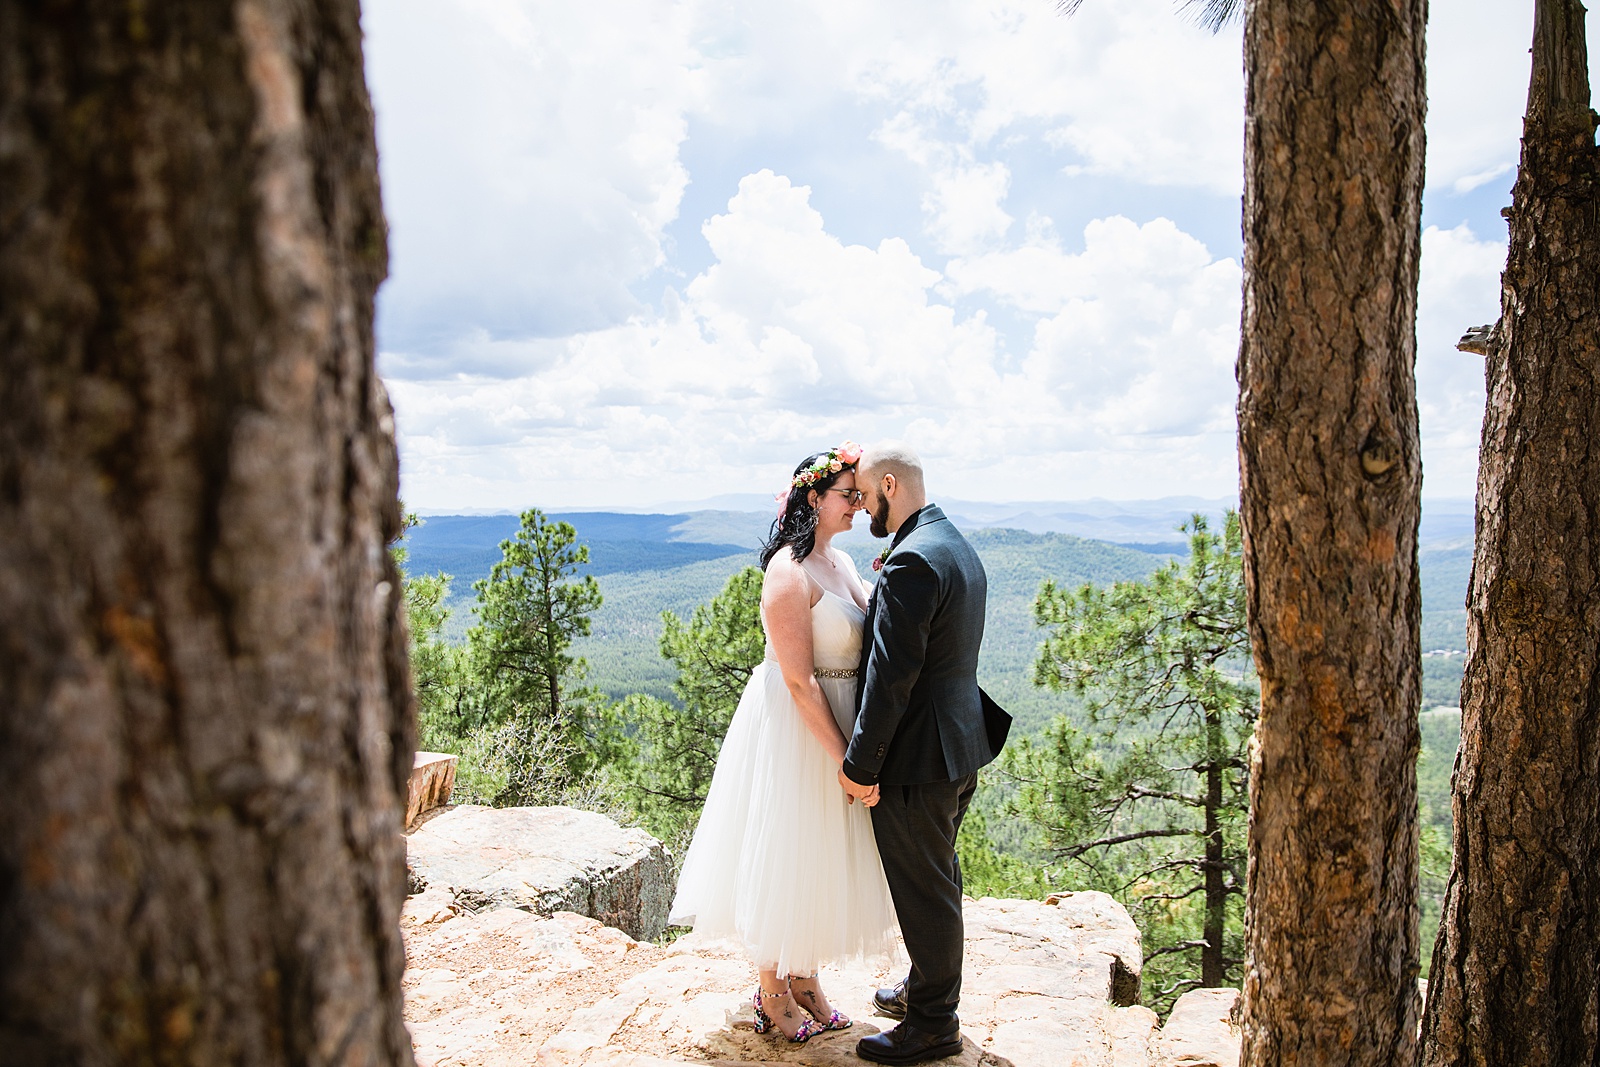 Bride & Groom share an intimate moment at their Mogollon Rim elopement by Arizona elopement photographer PMA Photography.